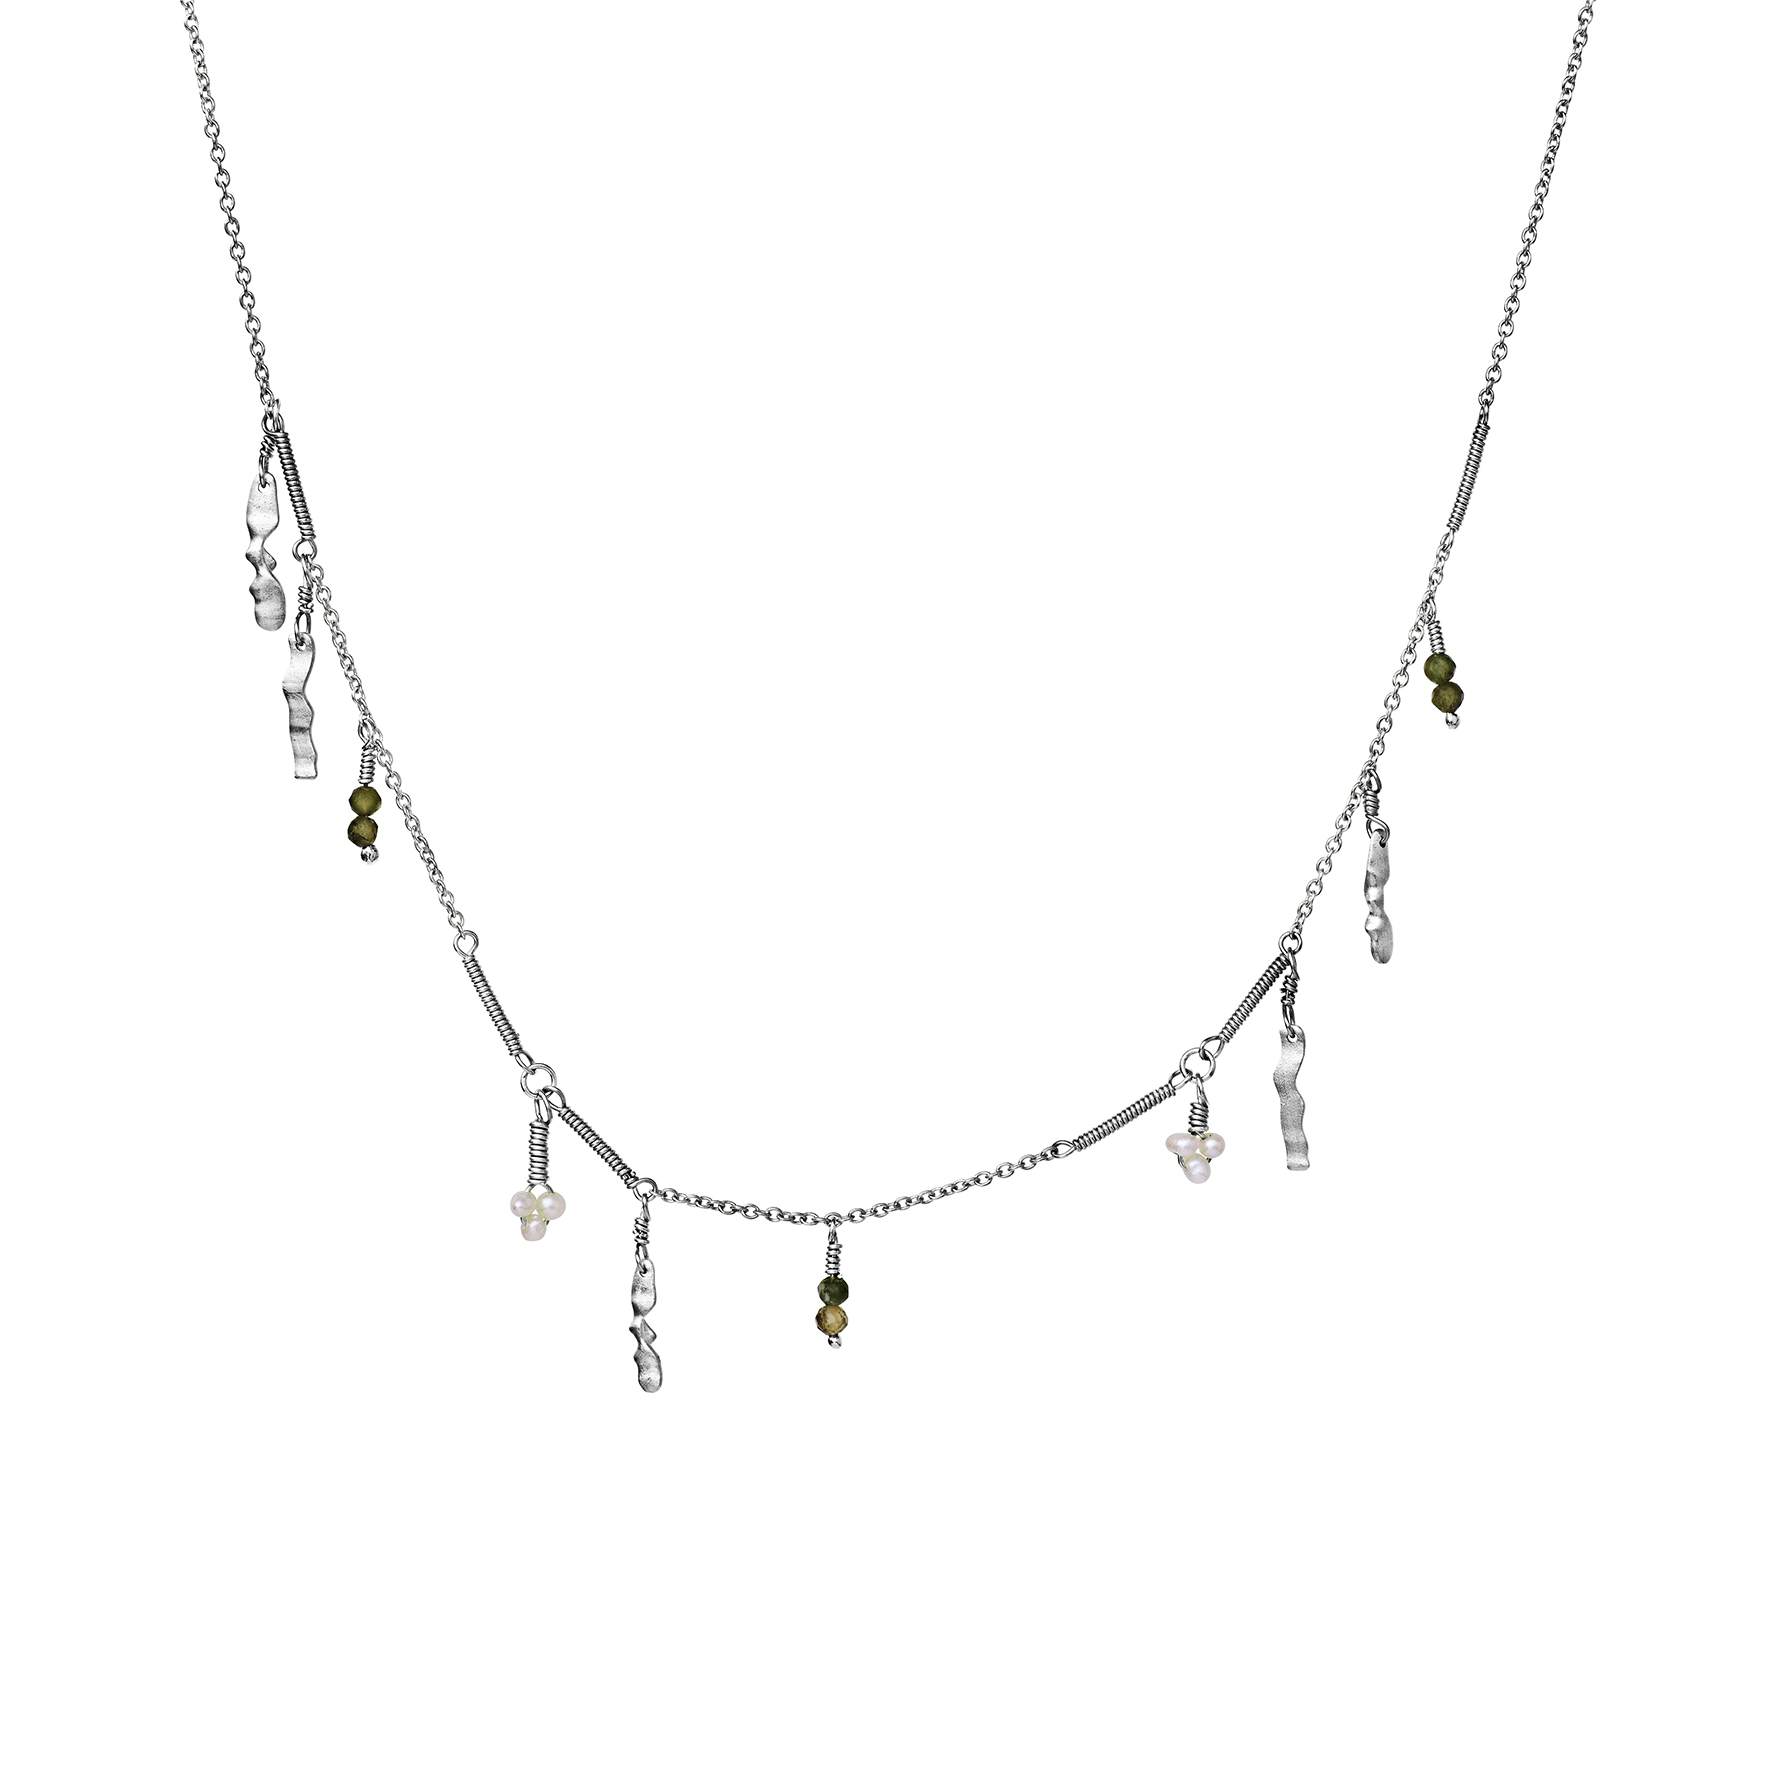 Bergdis Necklace from Maanesten in Silver Sterling 925| Turmalin,Freshwater Pearl